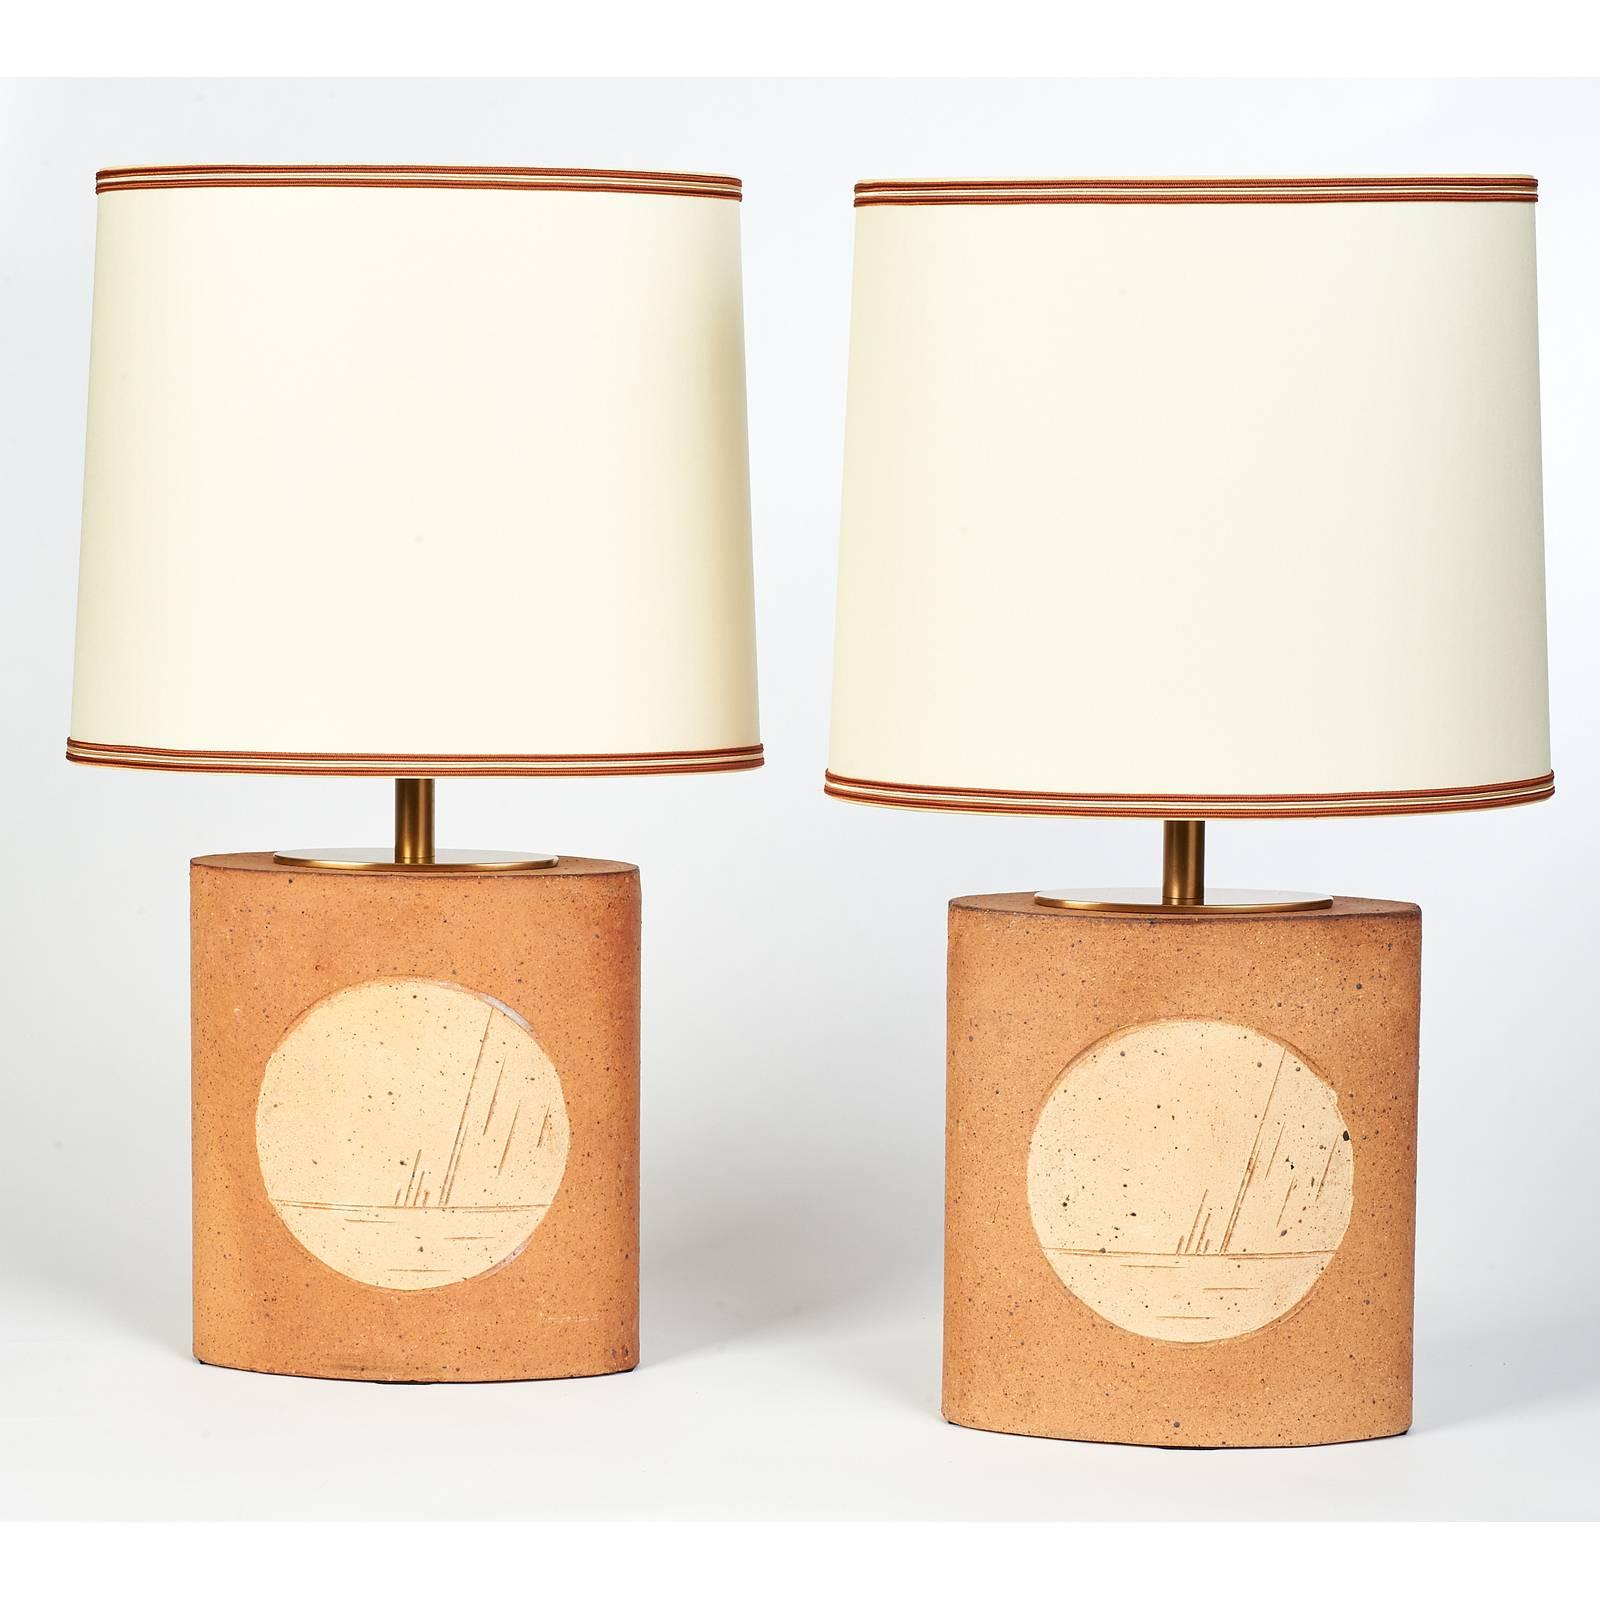 France, 1970s
Pair of oval fired ceramic table lamps incised with abstract geometric motifs.
From a collection of French 1970s fired ceramic lamps.
Four available, sold as a pair or singly
Priced individually
Dimensions: 23 H x 13 W x 8.5